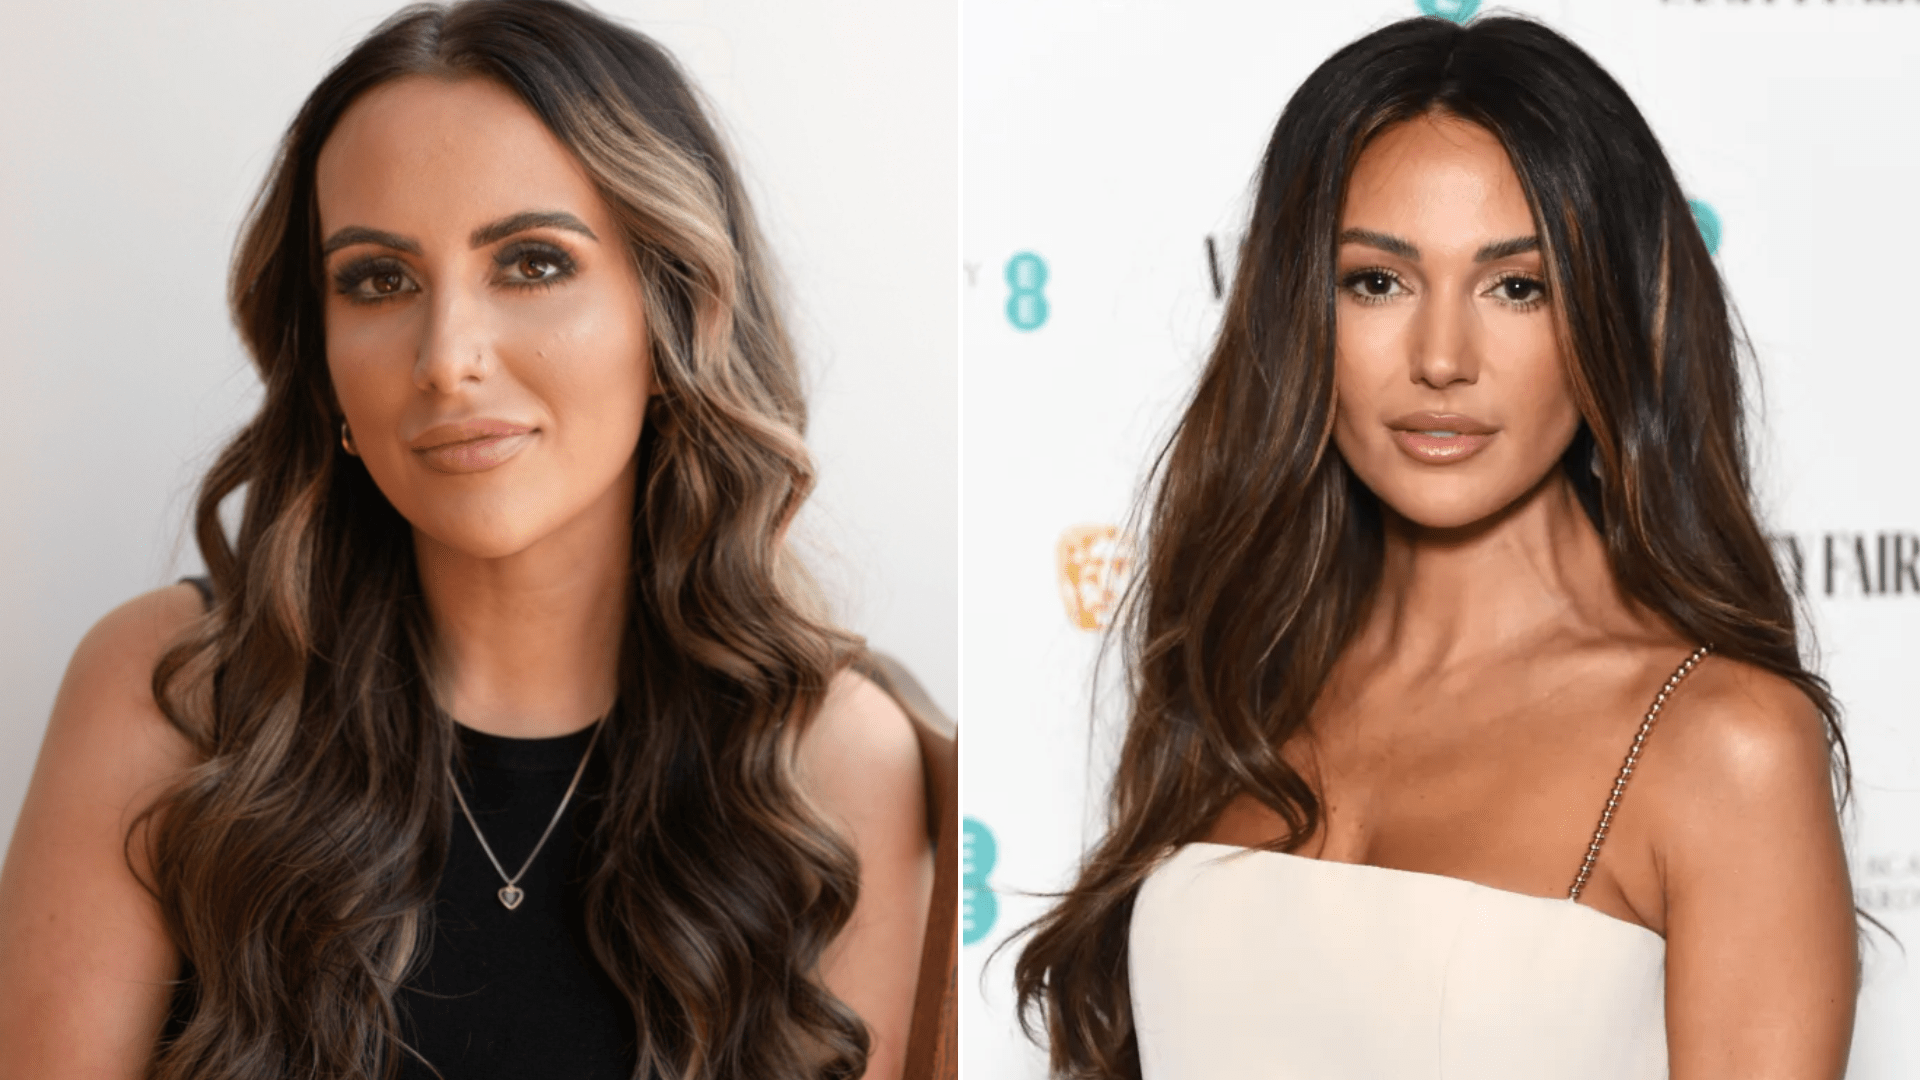 TV star Michelle Keegan is a fan of my racy side hustle & sent my sales sky high – I’ve even bought a new house and car [Video]